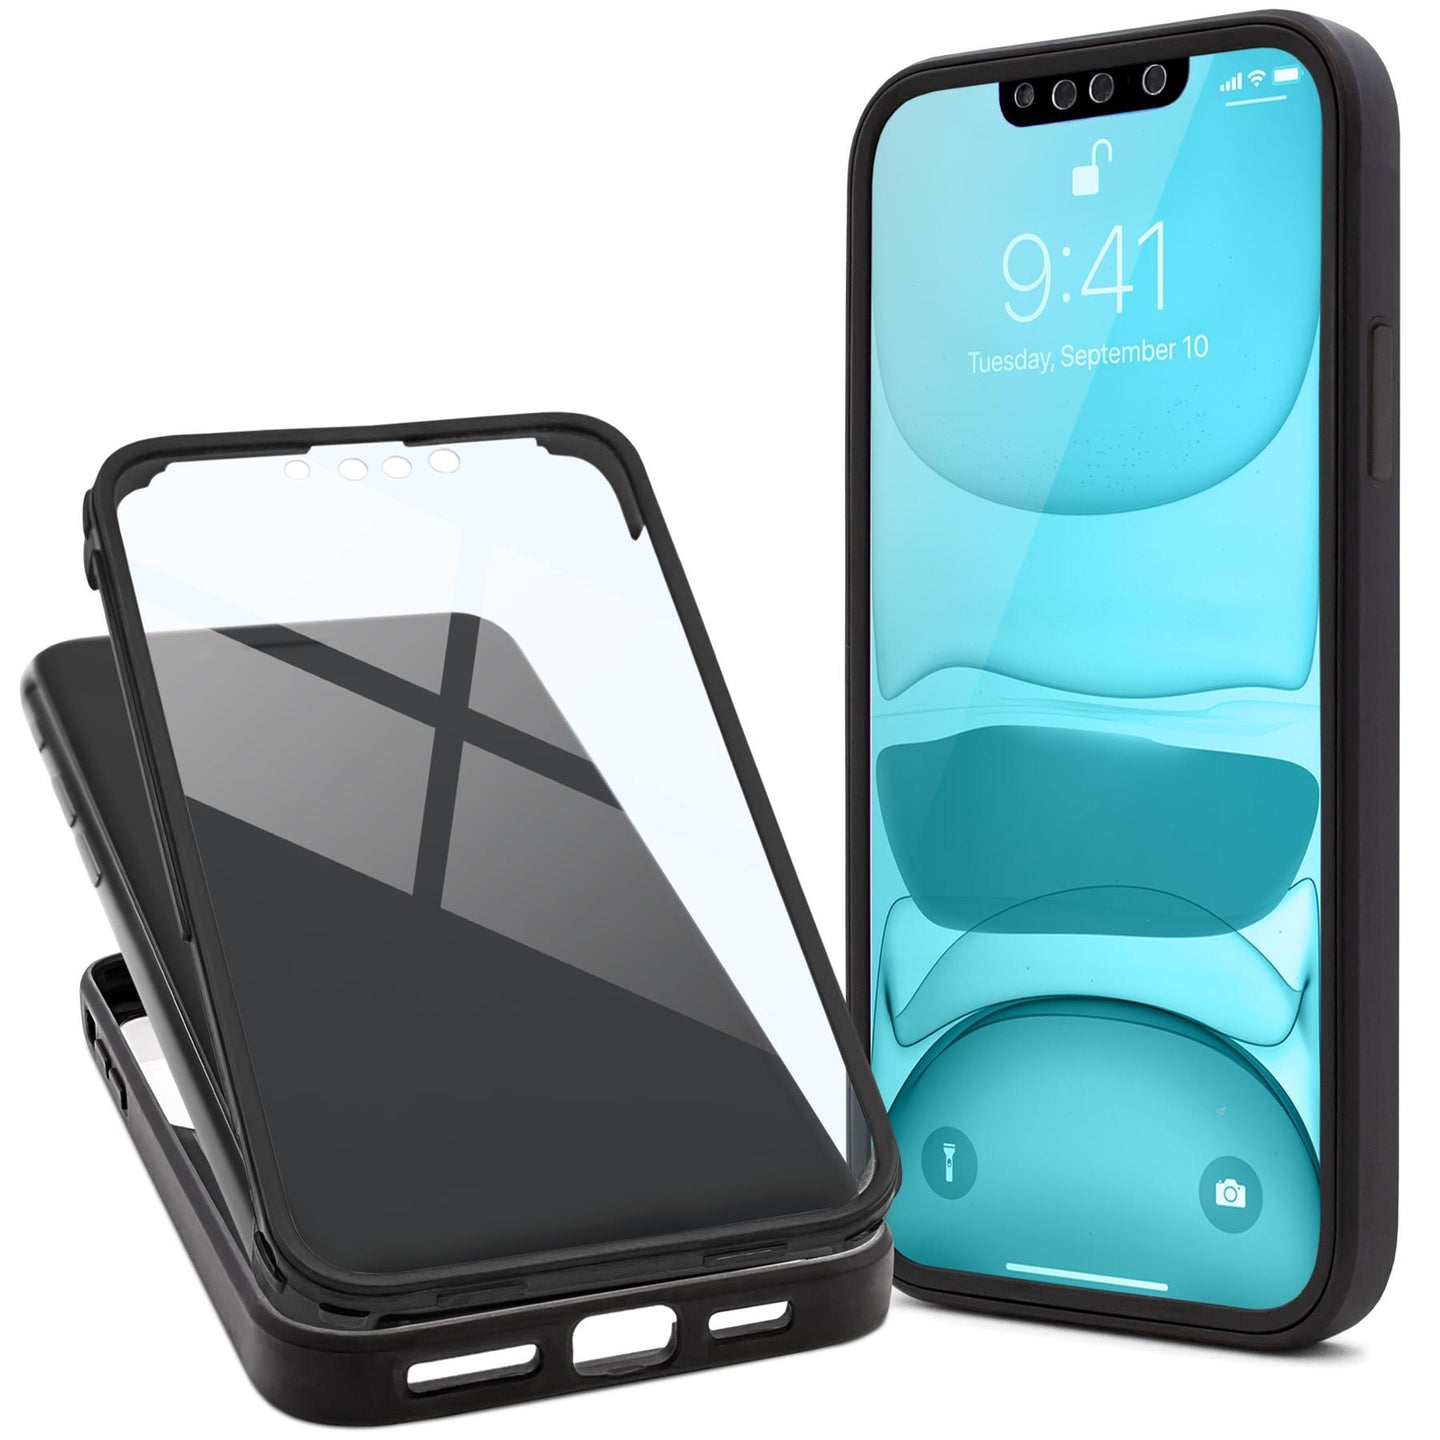 Moozy 360 Case for iPhone X / iPhone XS - Black Rim Transparent Case, Full Body Double-sided Protection, Cover with Built-in Screen Protector